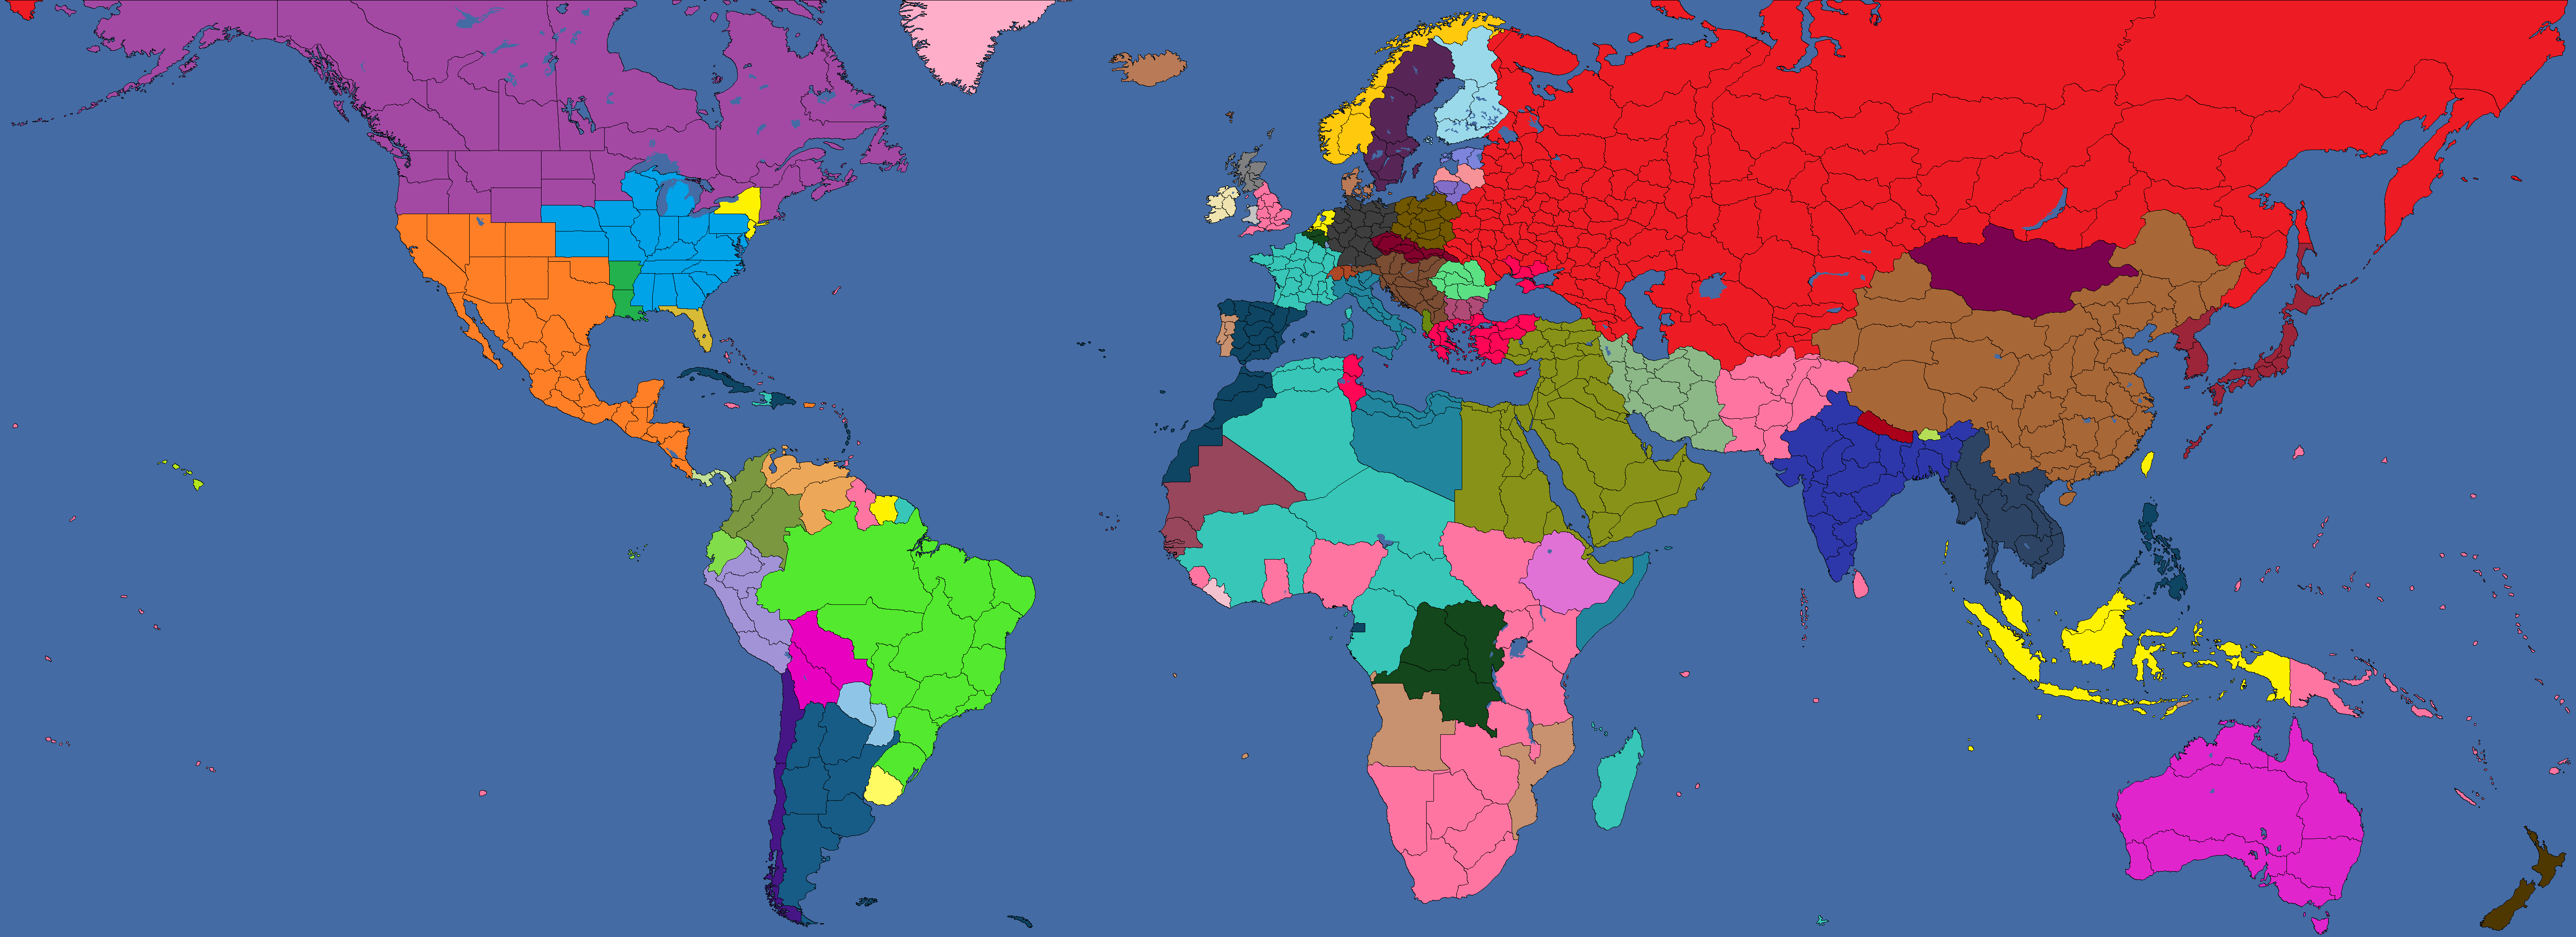 Hoi4 Alternate Map The Petersburg Pact By Undella2 Dbc7i8e 